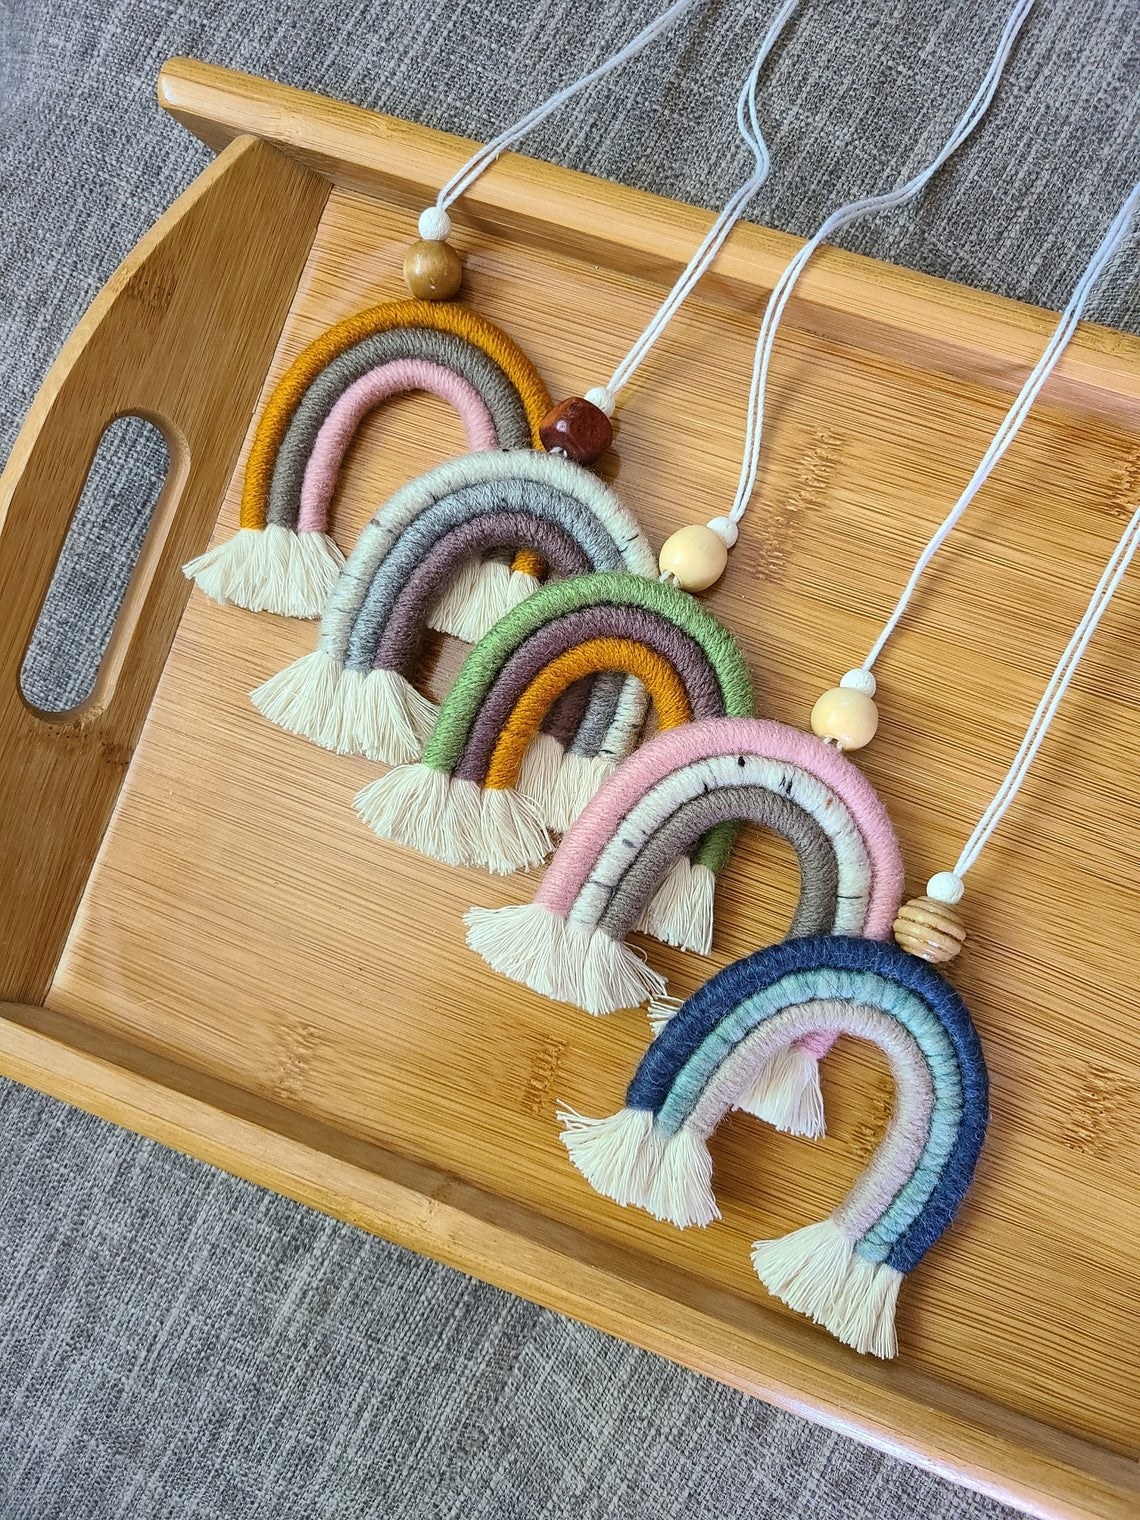 five rainbow macrame charms with a wooden bead on each 